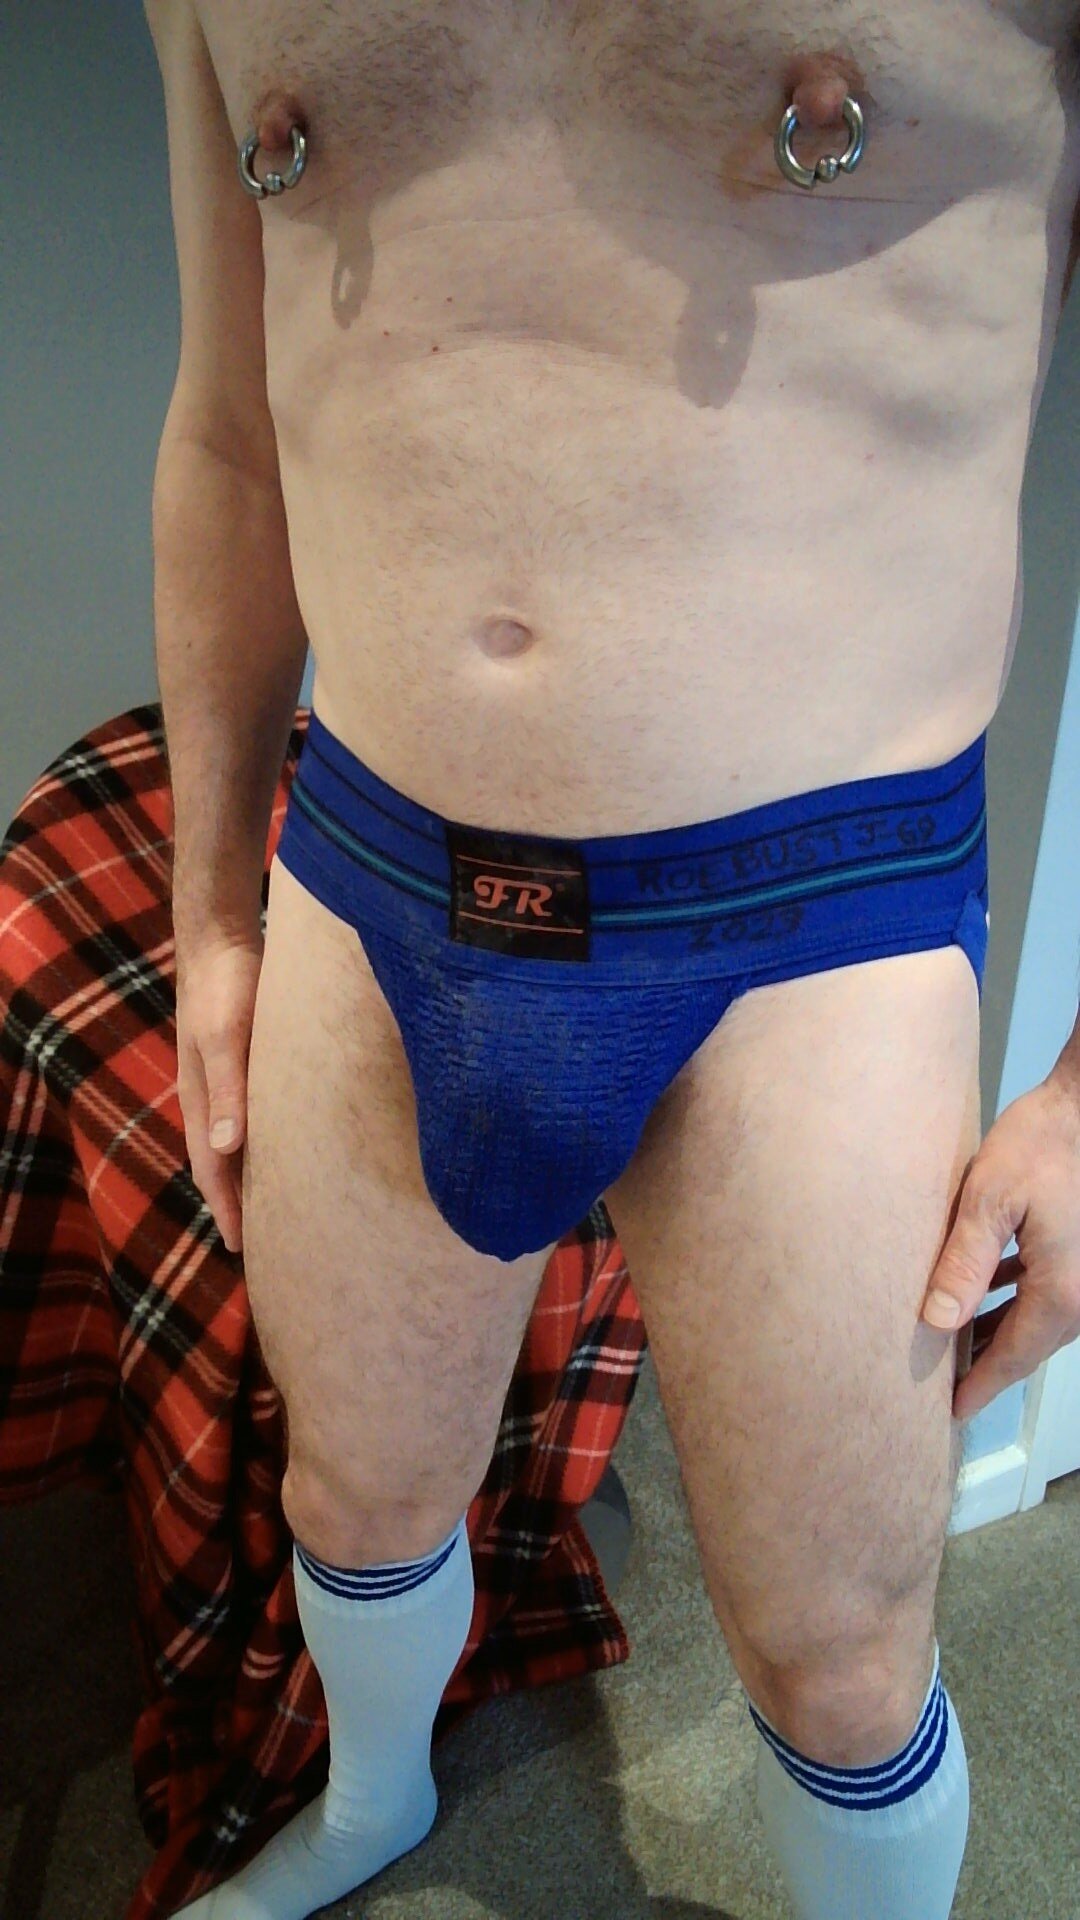 Close up of crusty and swapped F&R jockstrap #1